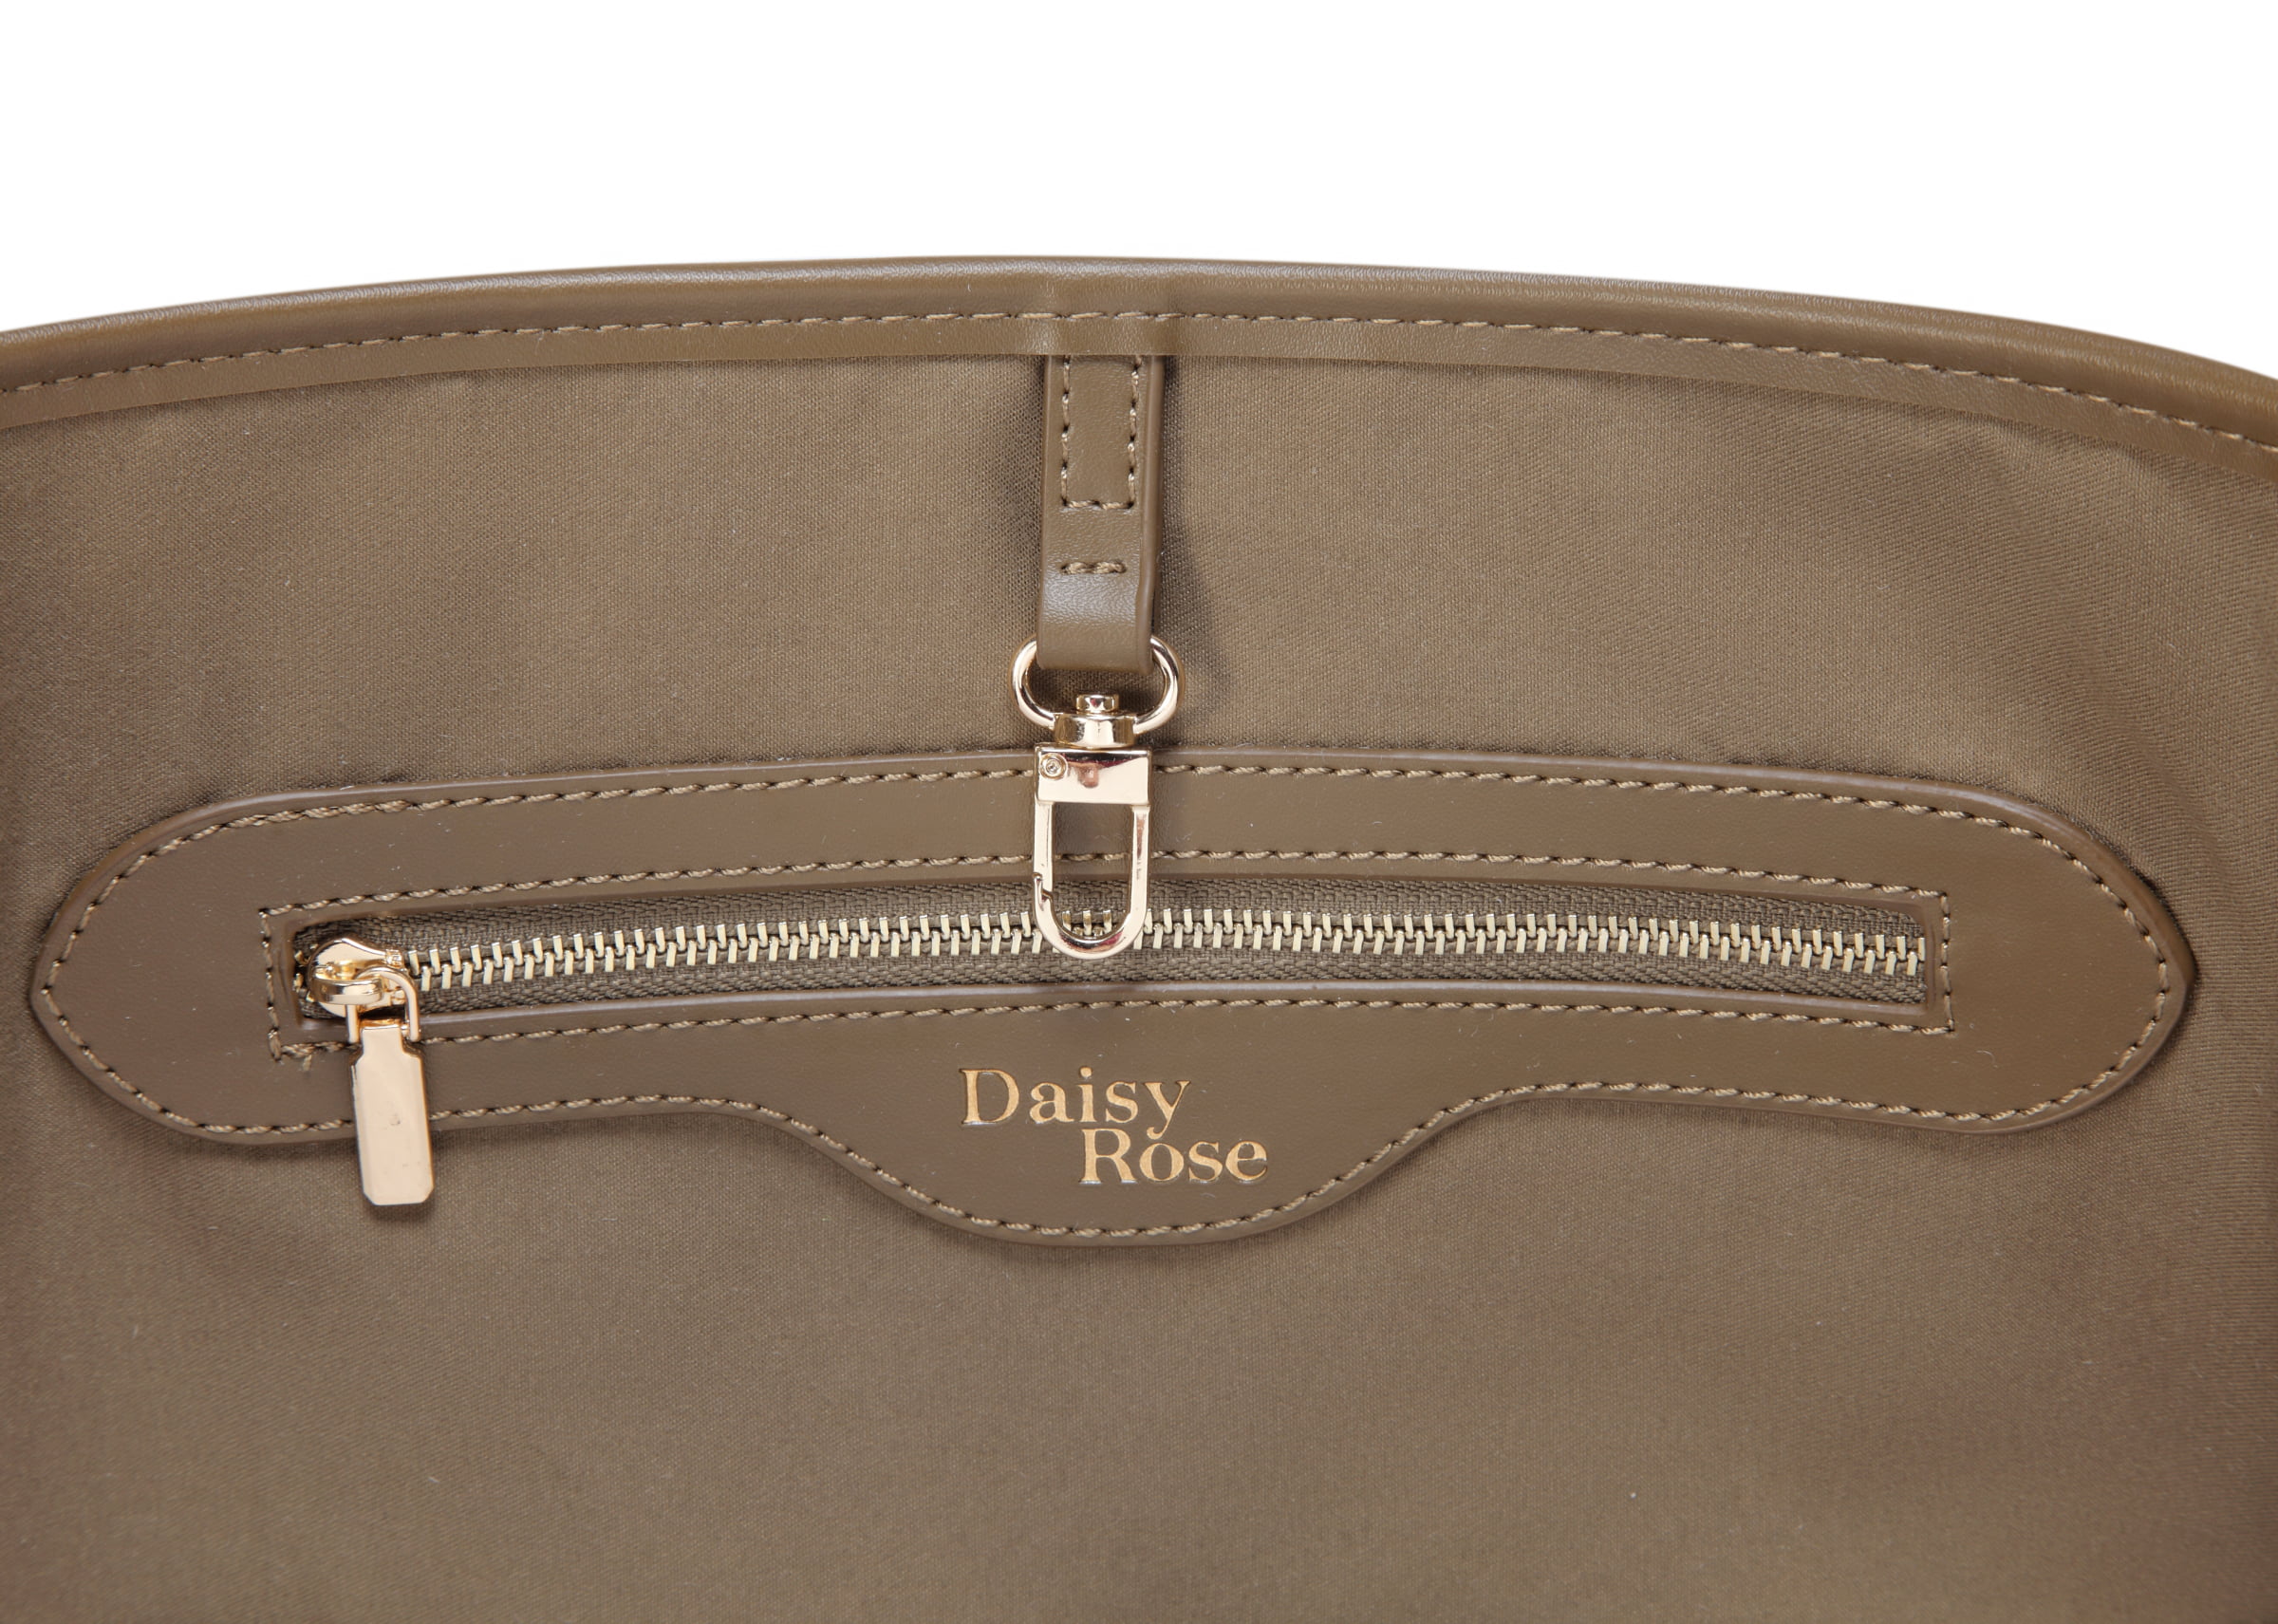 Collections – Daisy Rose bags